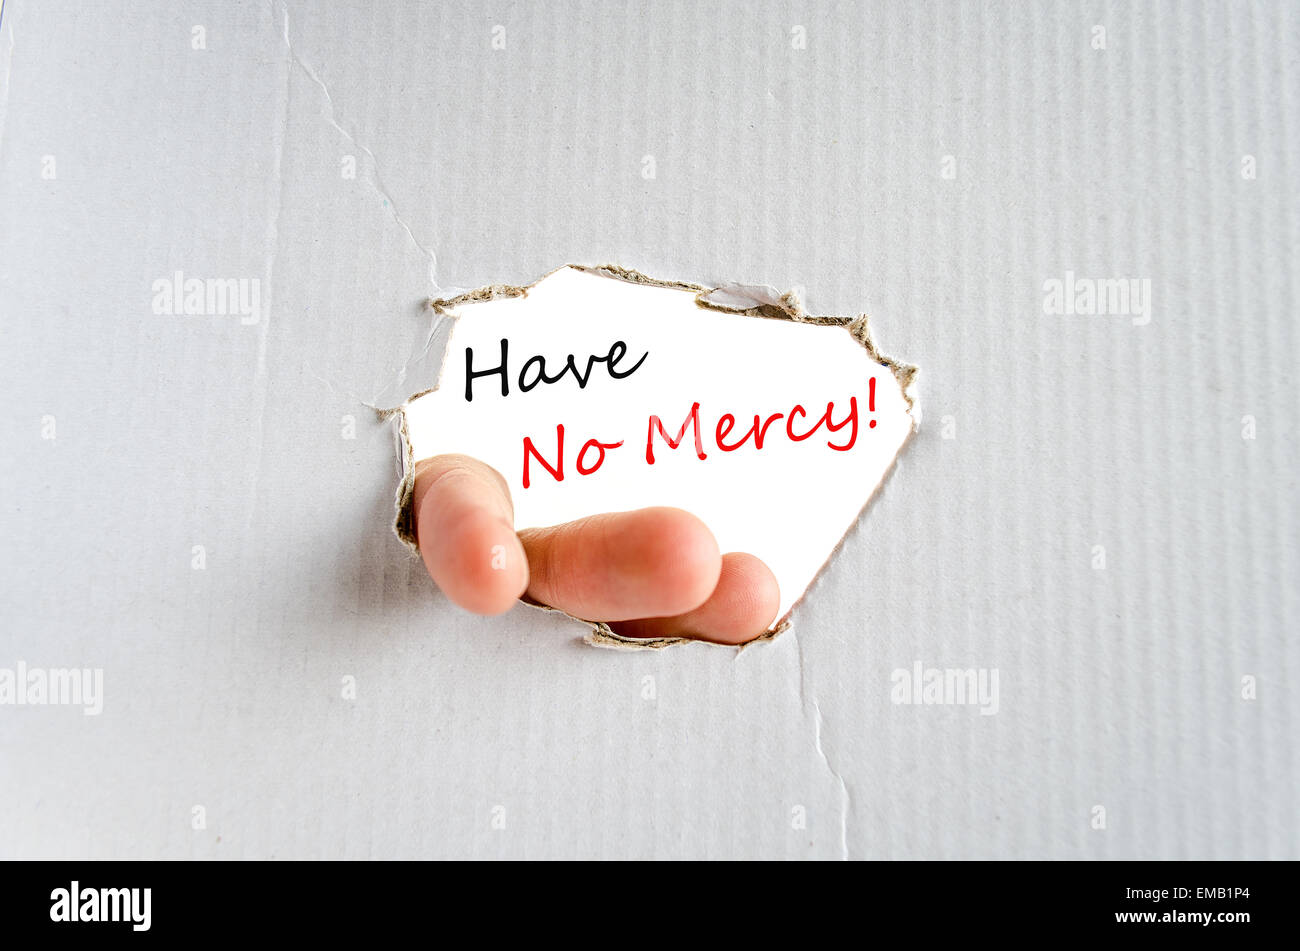 Have No Mercy Concept Isolated Over White Background Stock Photo